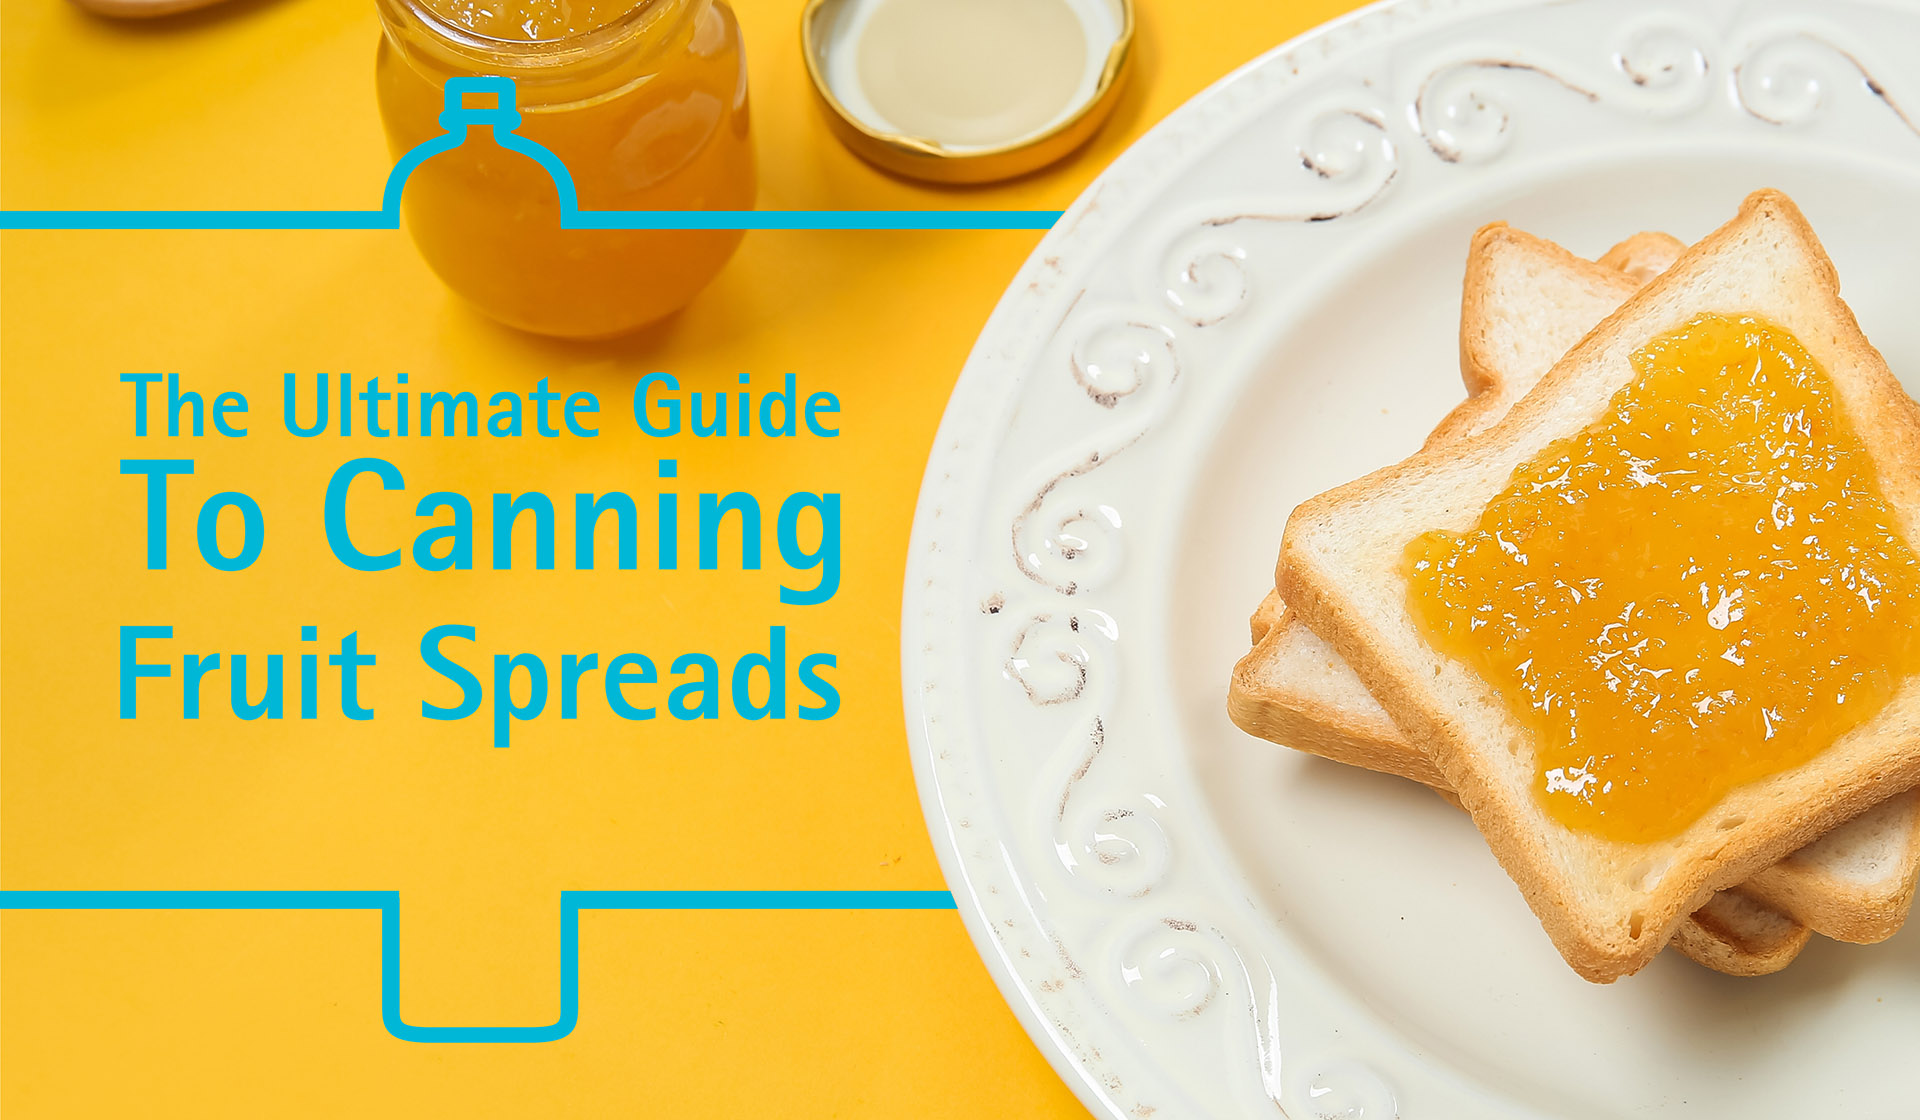 The Ultimate Guide To Canning Fruit Spreads